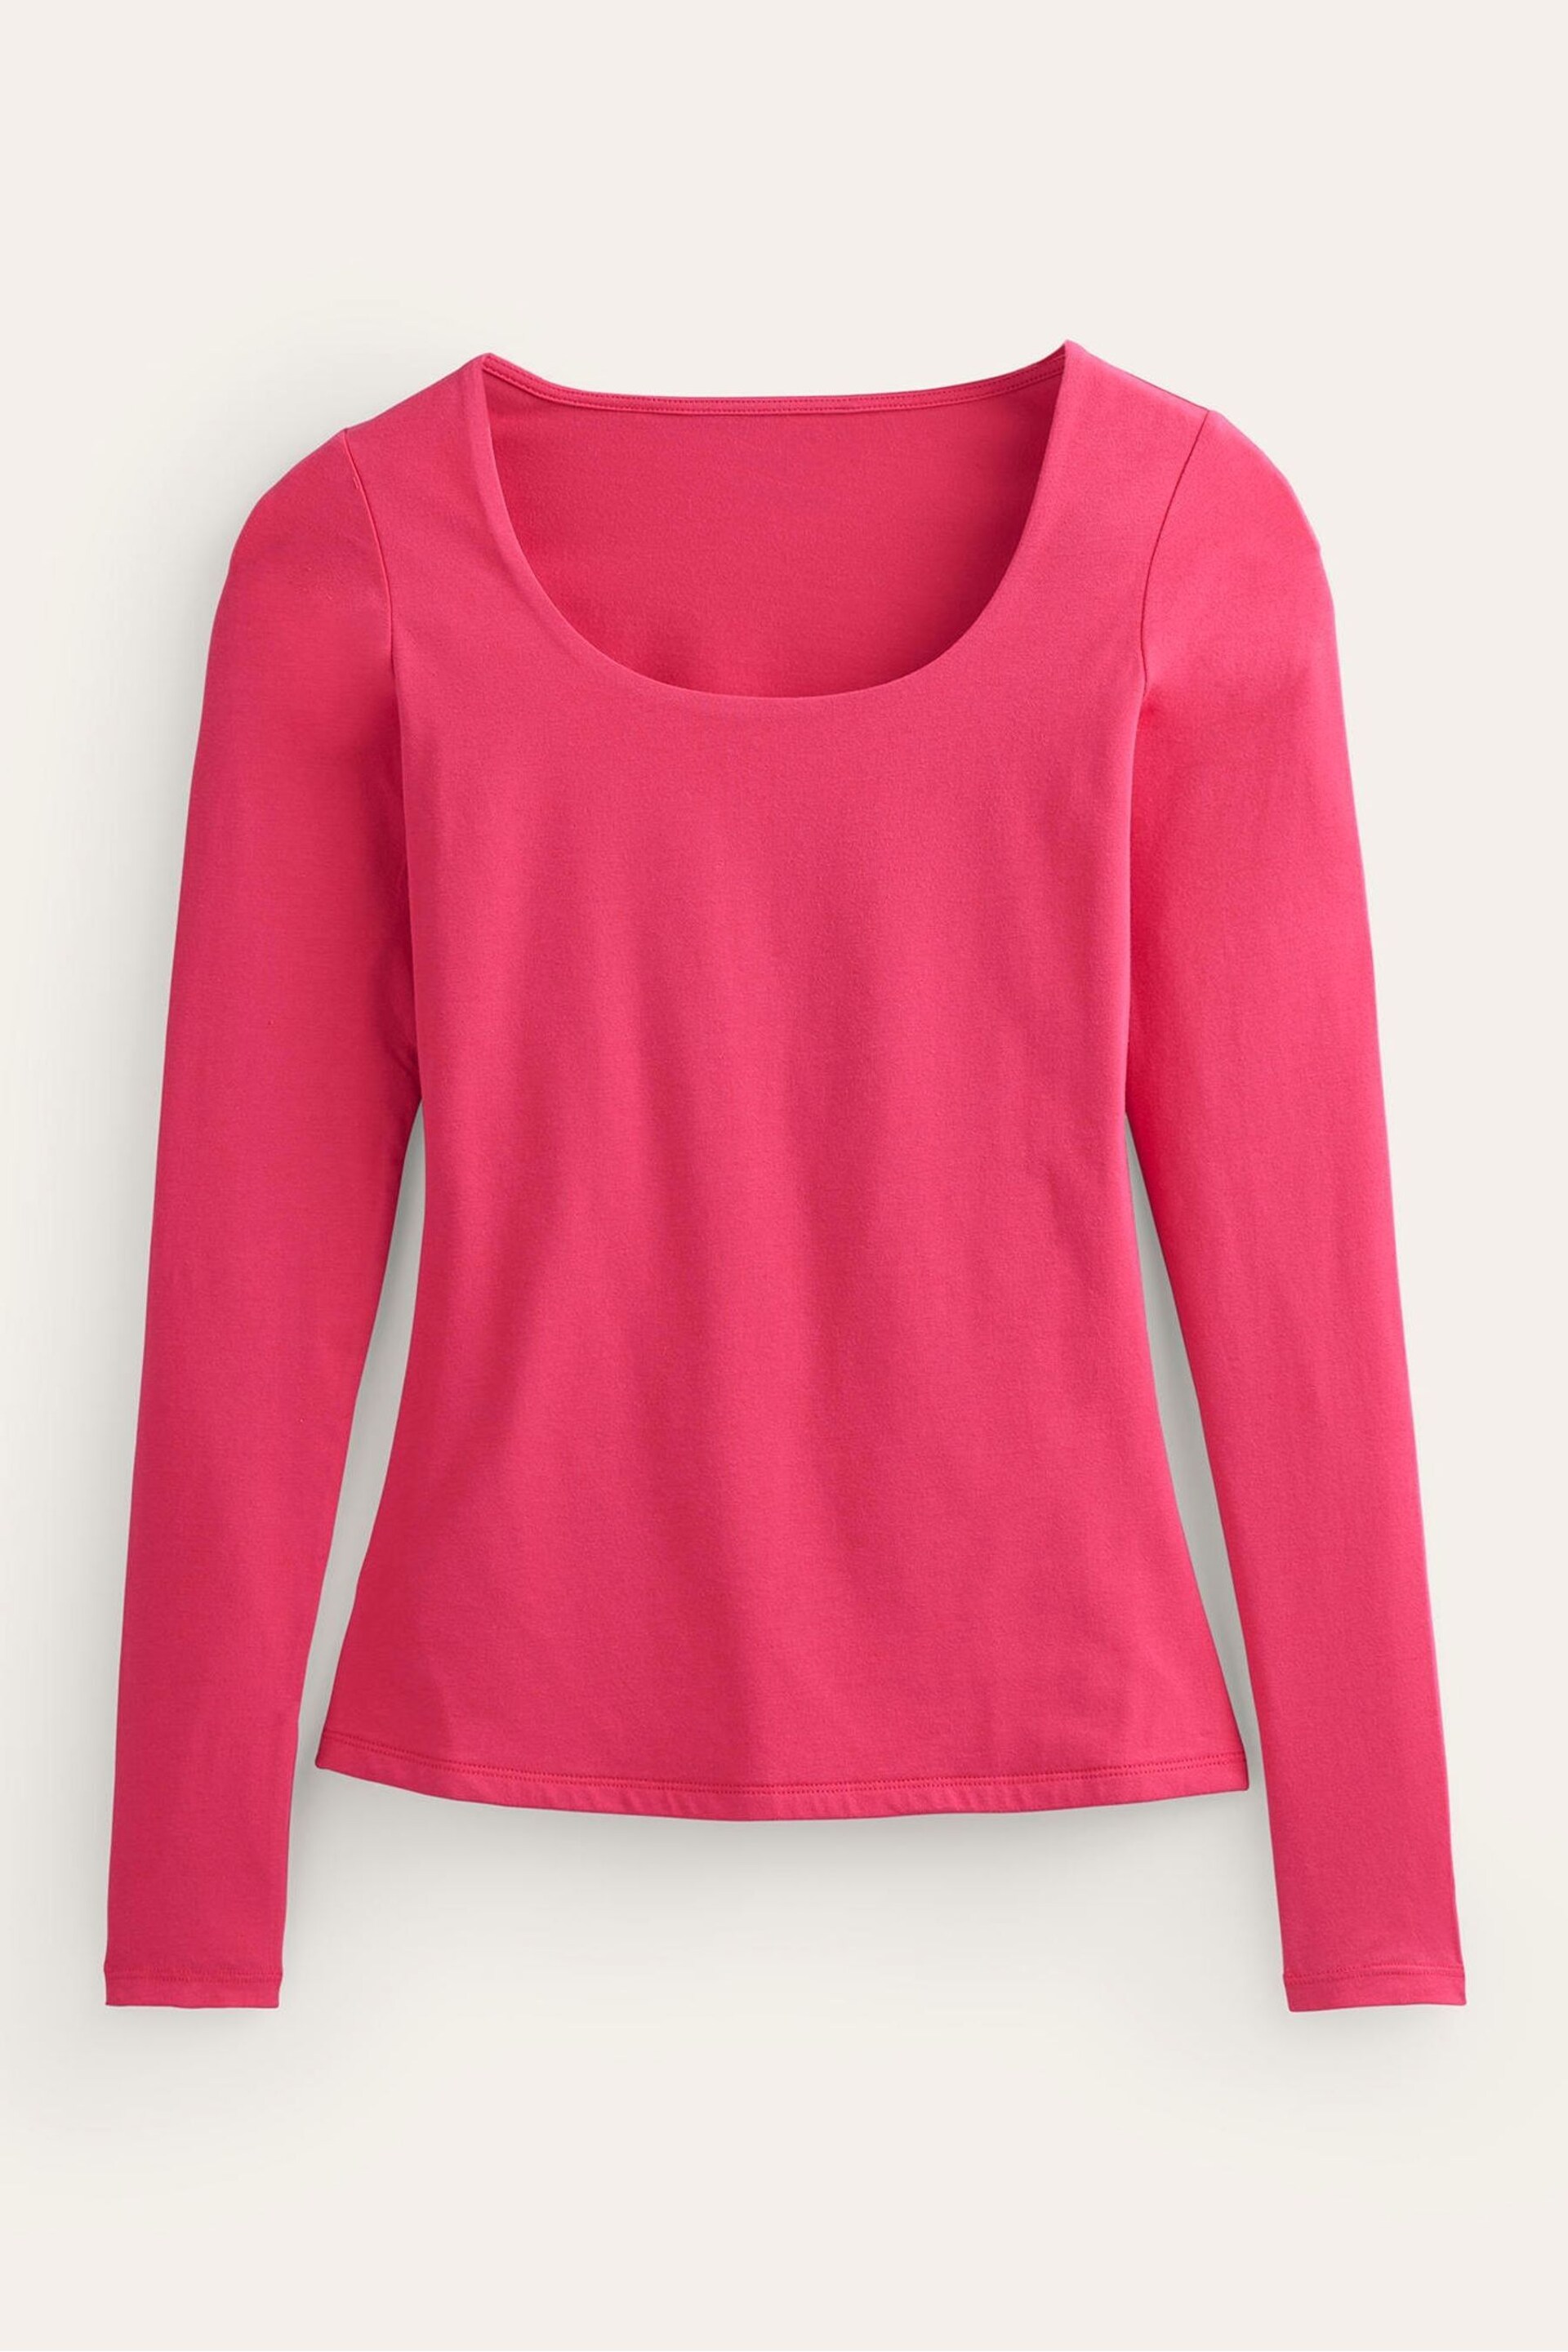 Boden Pink Double Layer Scoop Neck Long Sleeve T-Shirt - Image 5 of 5